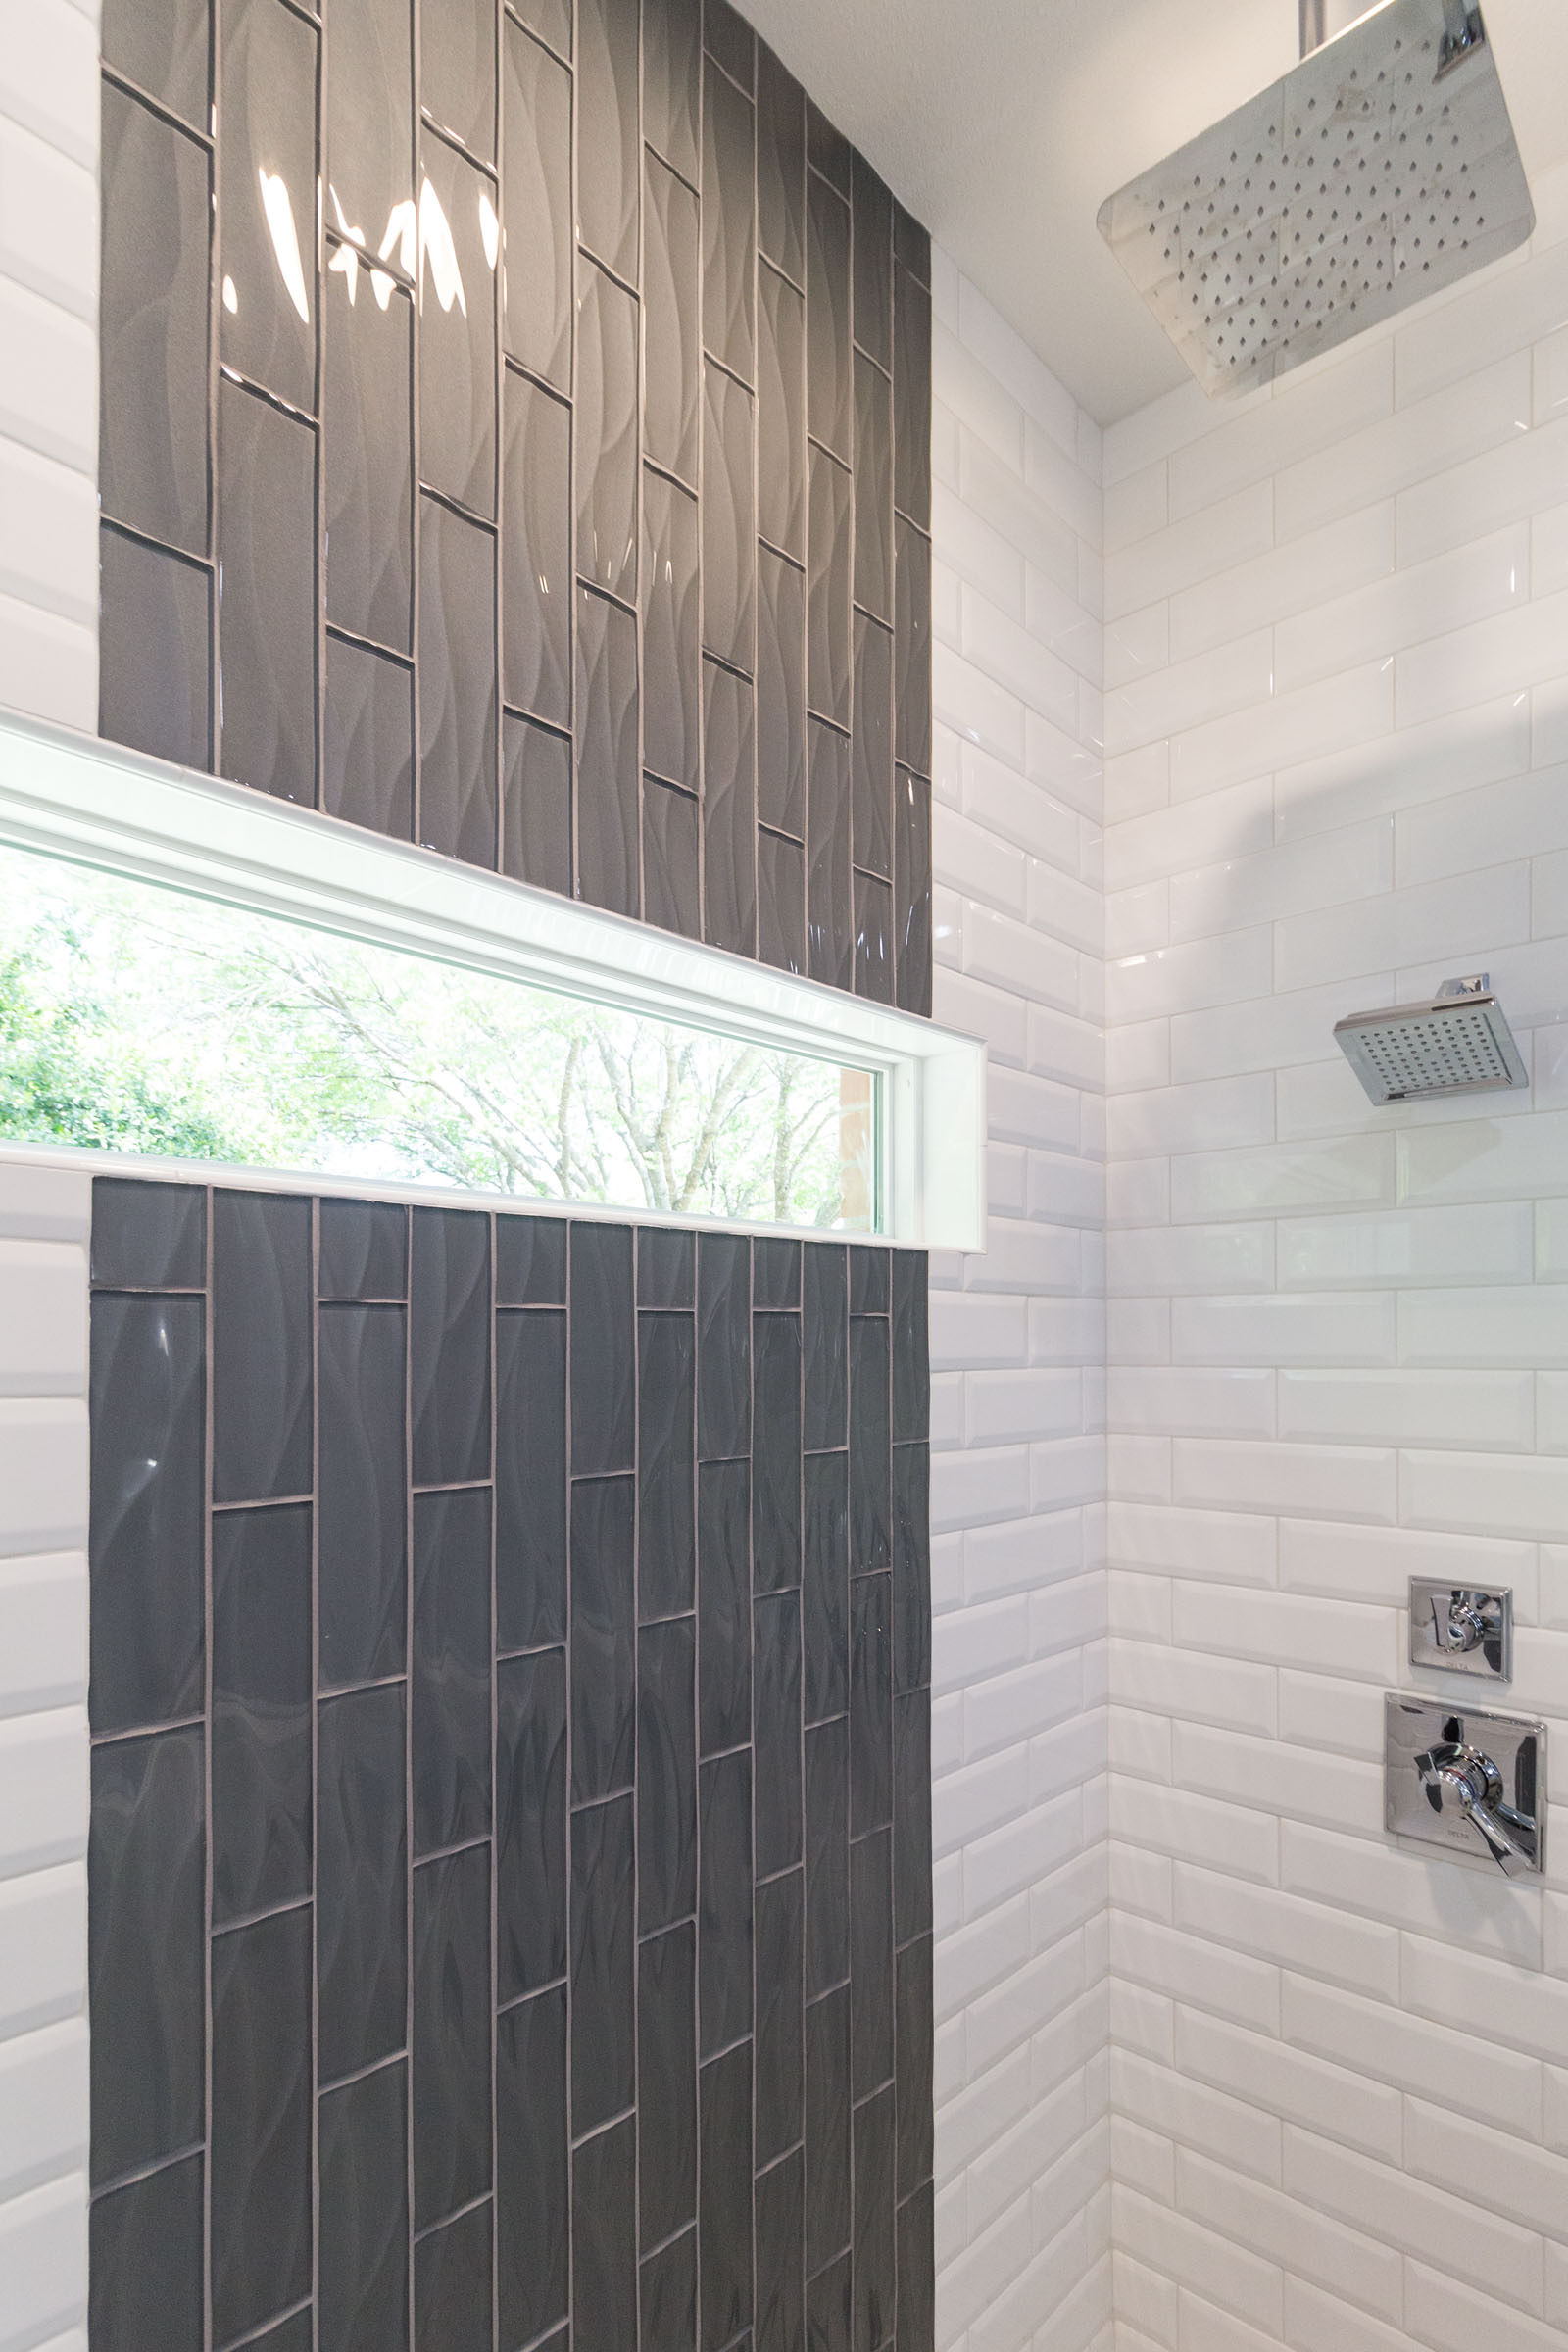 Contemporary bathroom remodel with vertical grey glass tile, white subway tile, and chrome shower heads